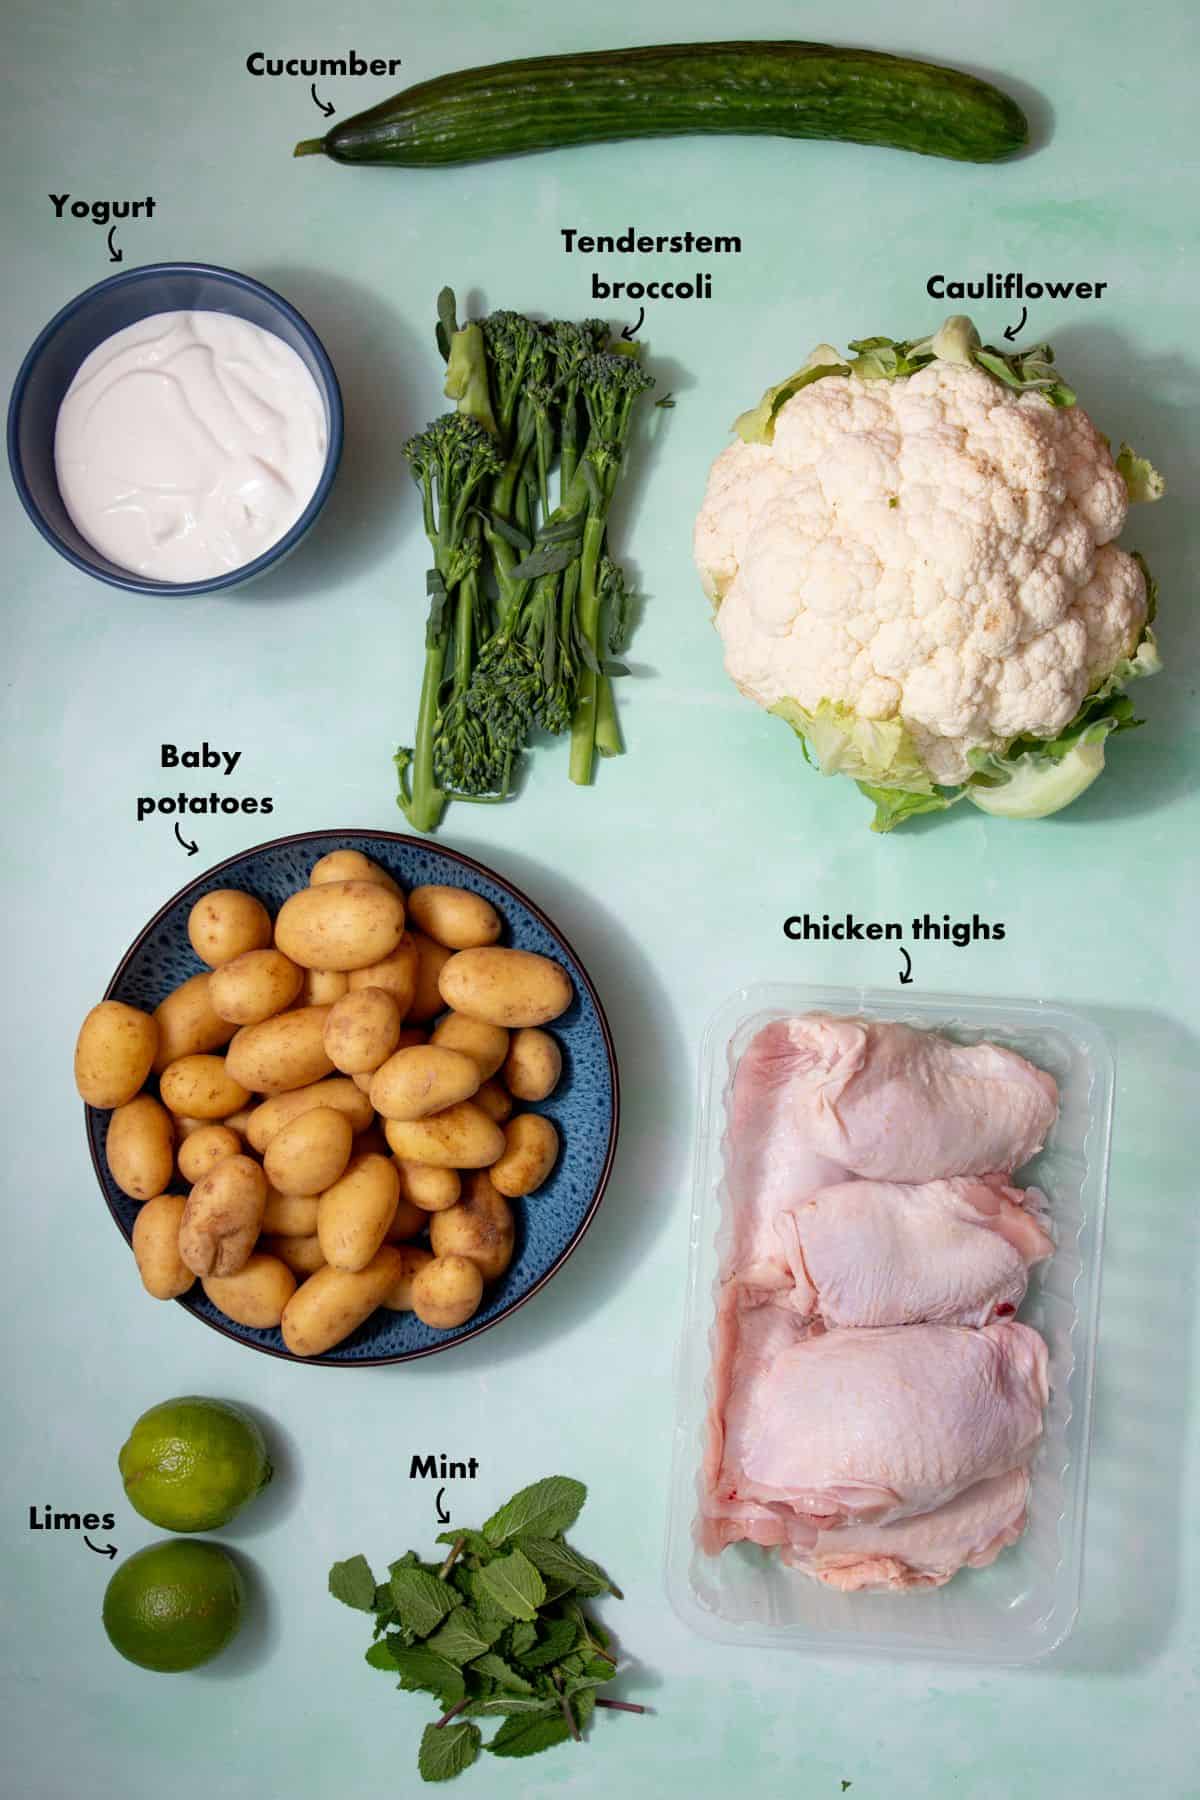 Ingredients to make the cauliflower and chicken tray bake laid out on a pale blue background and labelled.